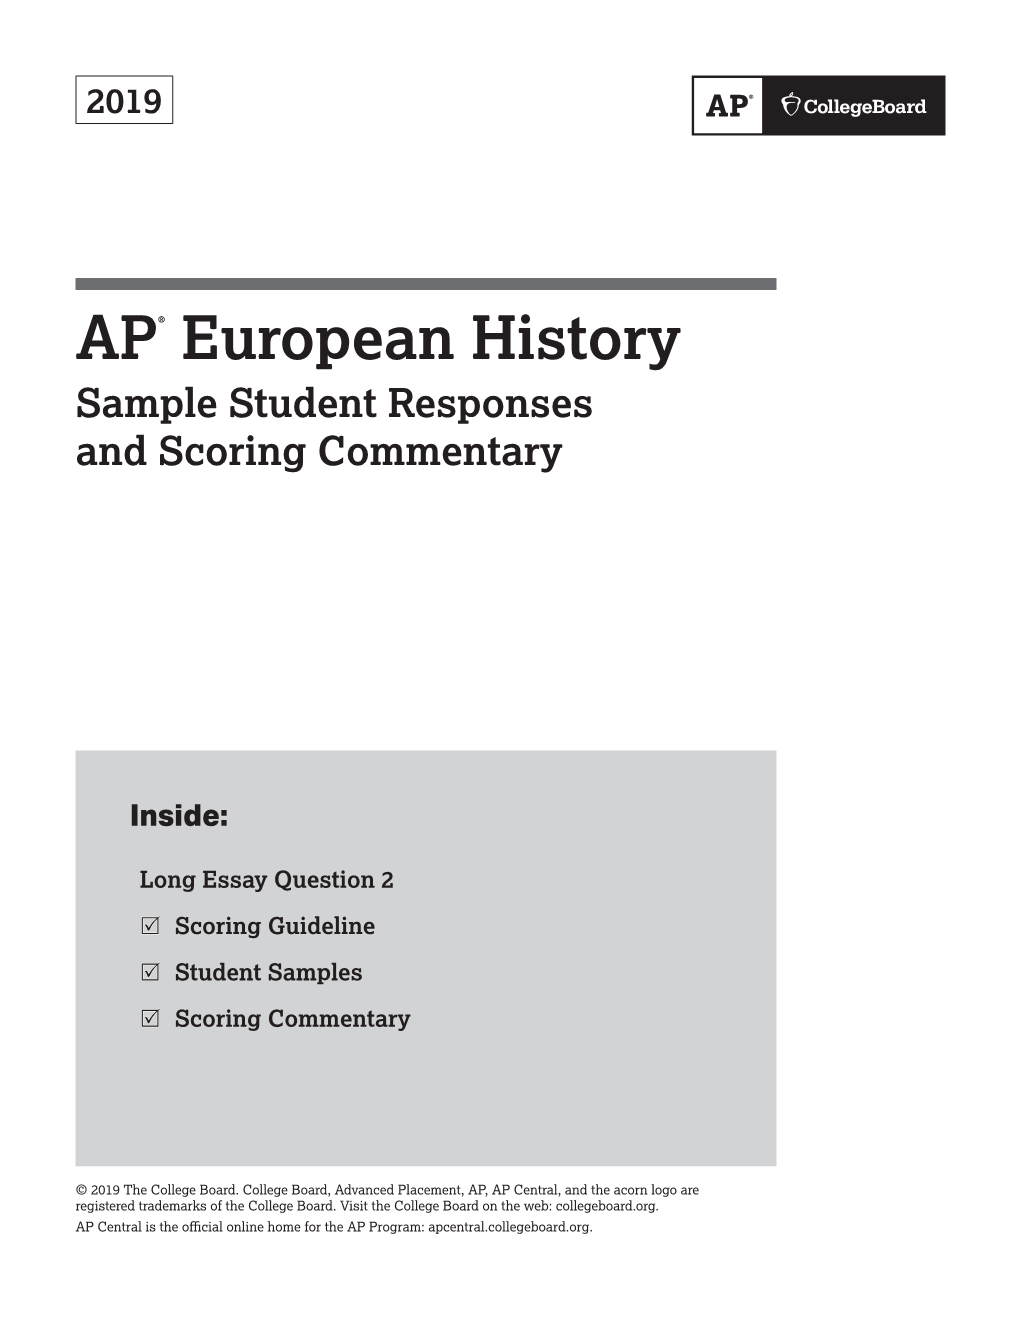 AP® European History Sample Student Responses and Scoring Commentary